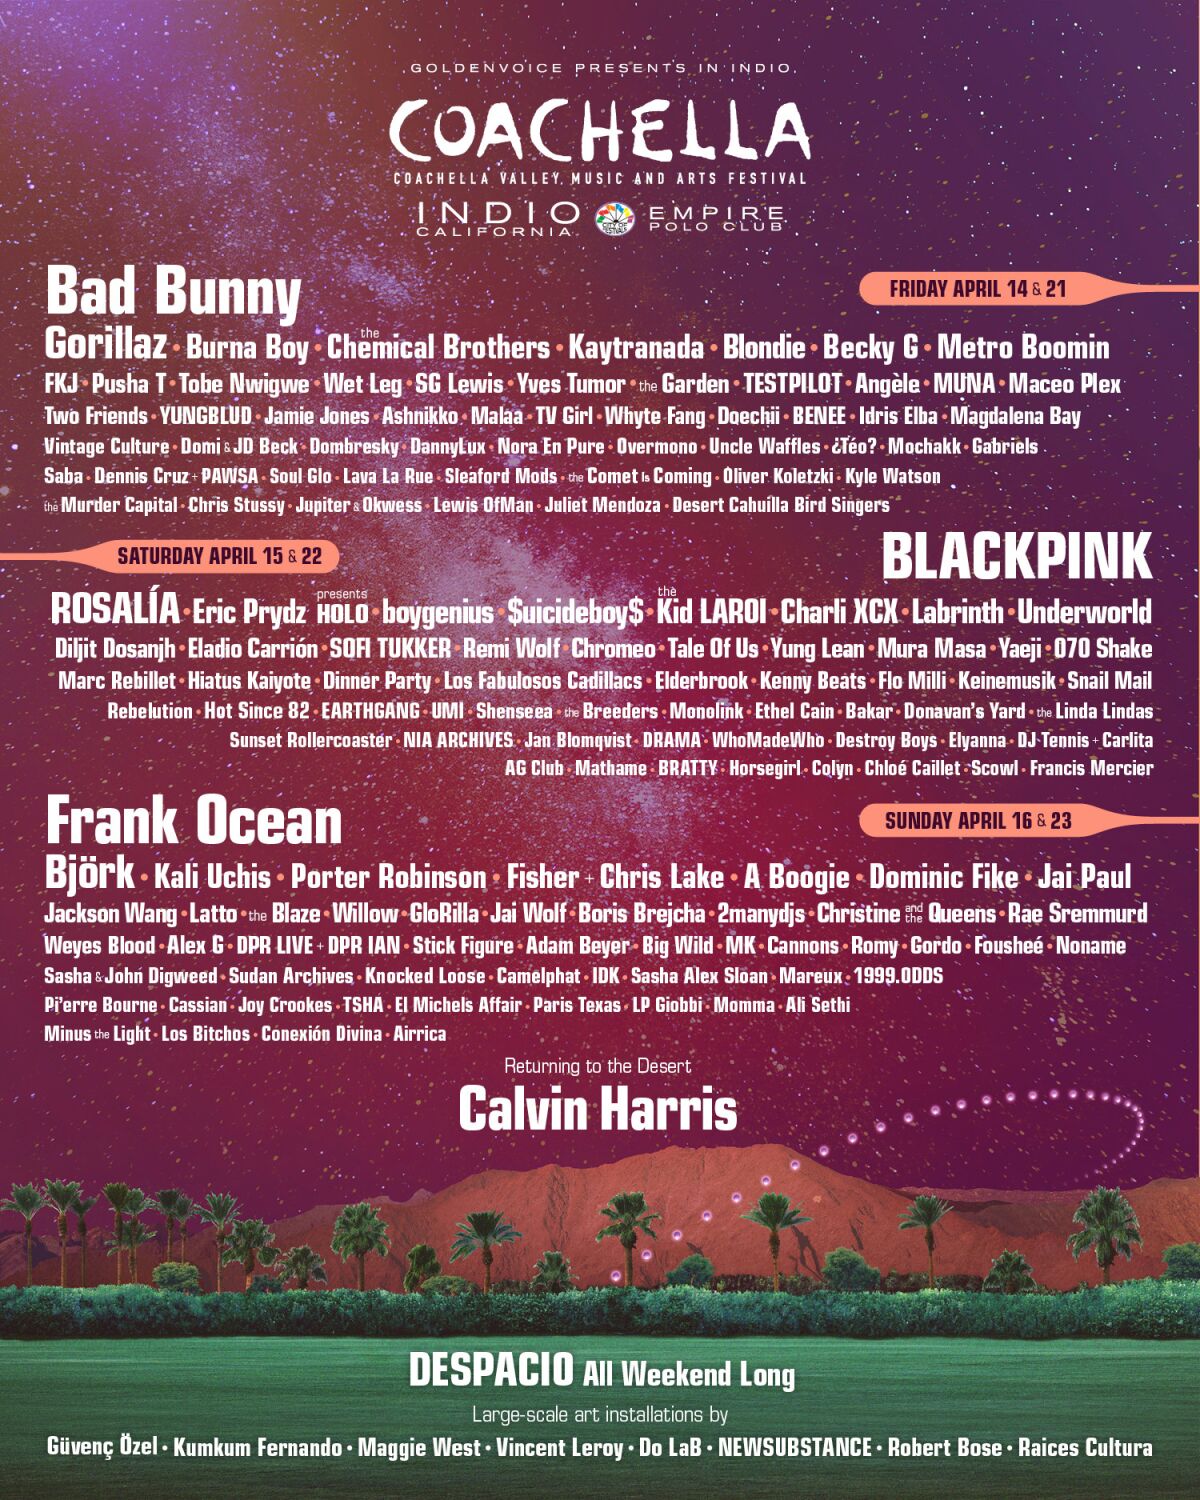 Bad Bunny, Blackpink and Frank Ocean will headline the 2023 Coachella Valley Music and Arts Festival in Indio, CA.